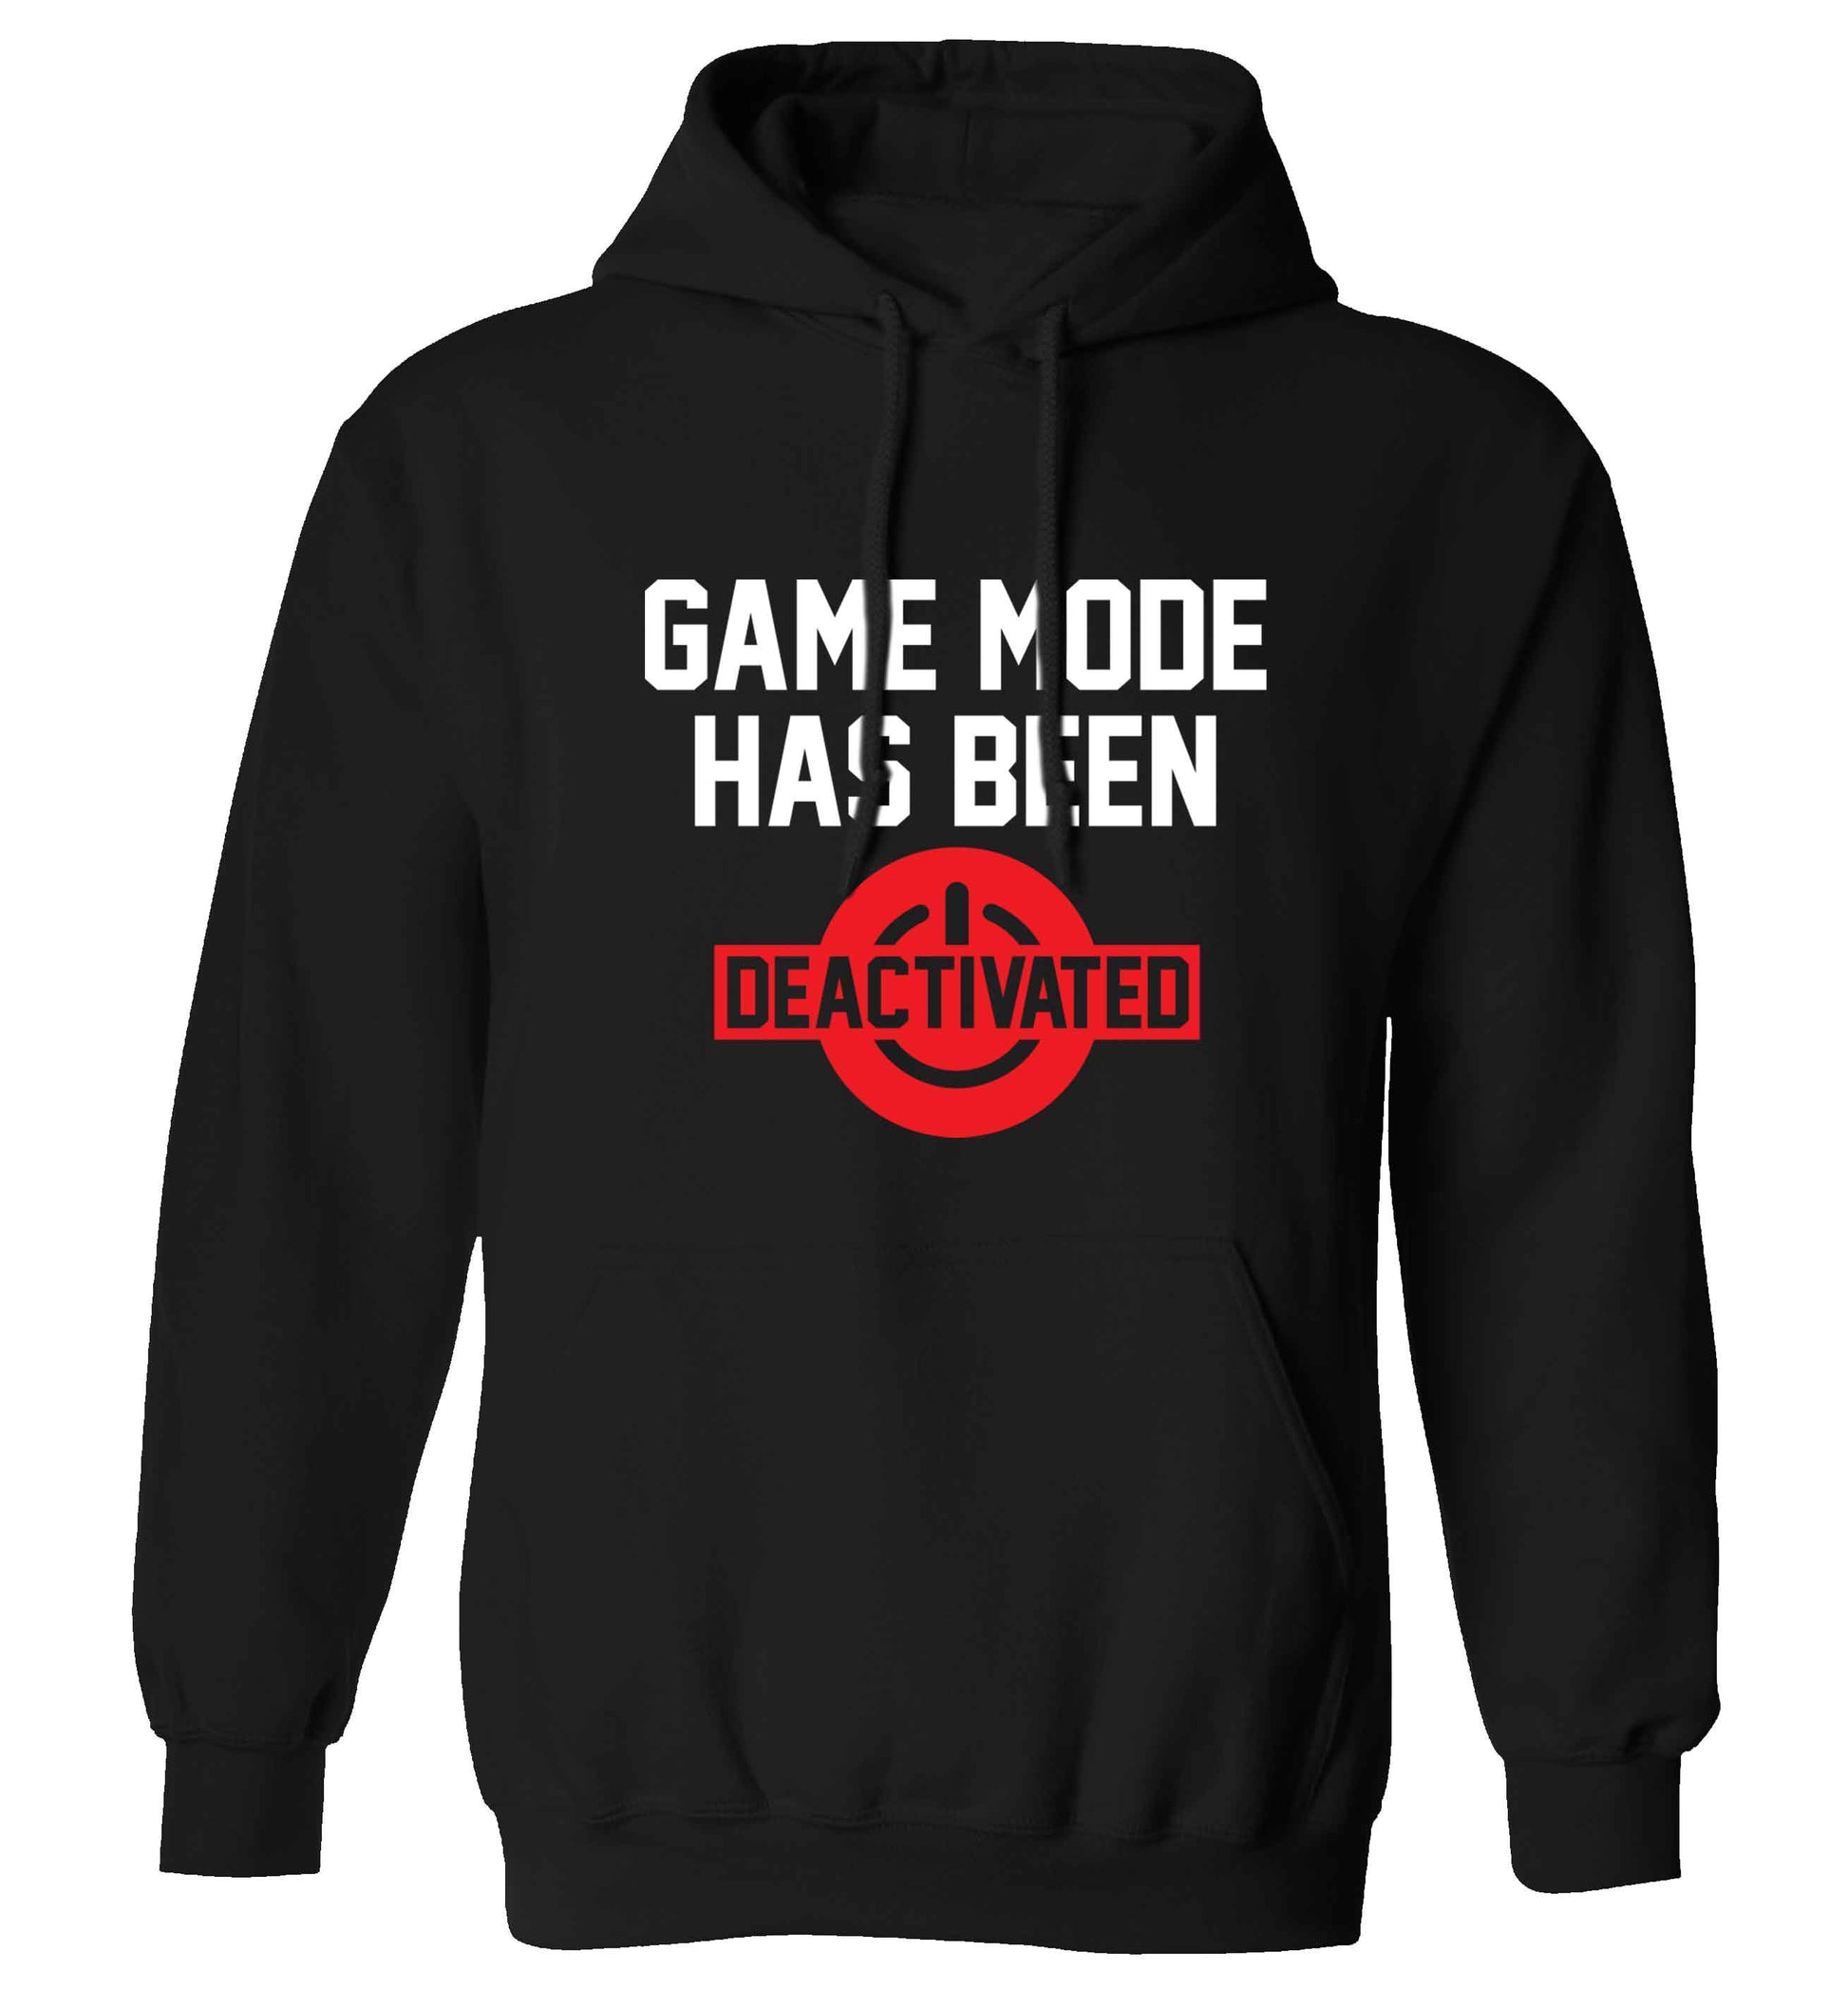 Game Mode Has Been Deactivated adults unisex black hoodie 2XL